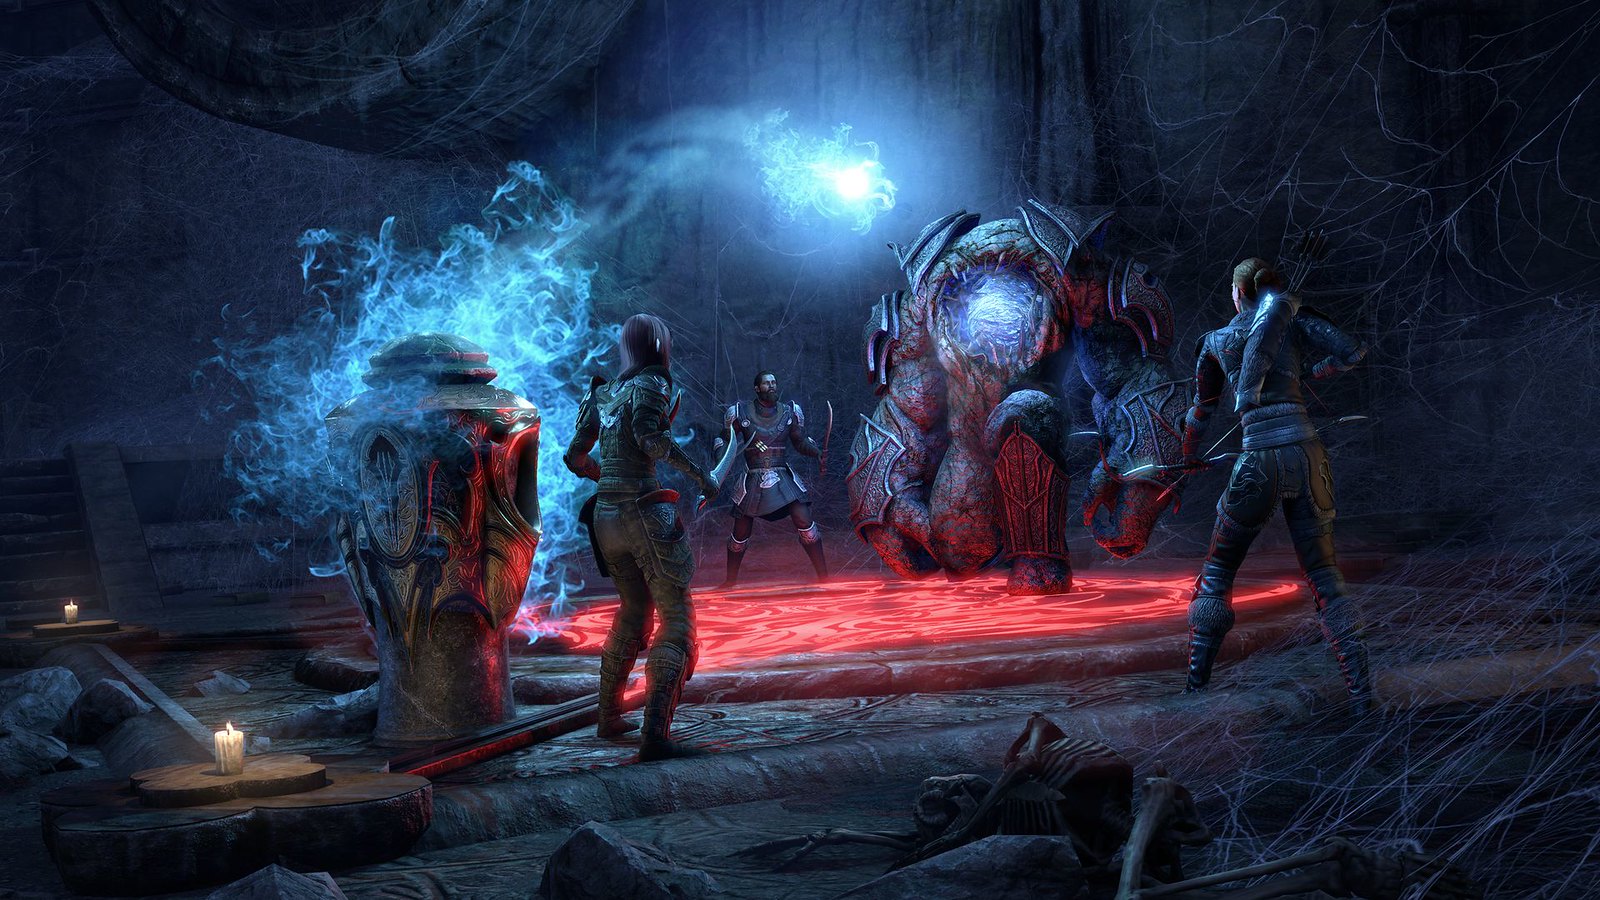 Markarth DLC, in-game events, & more coming soon to ESO